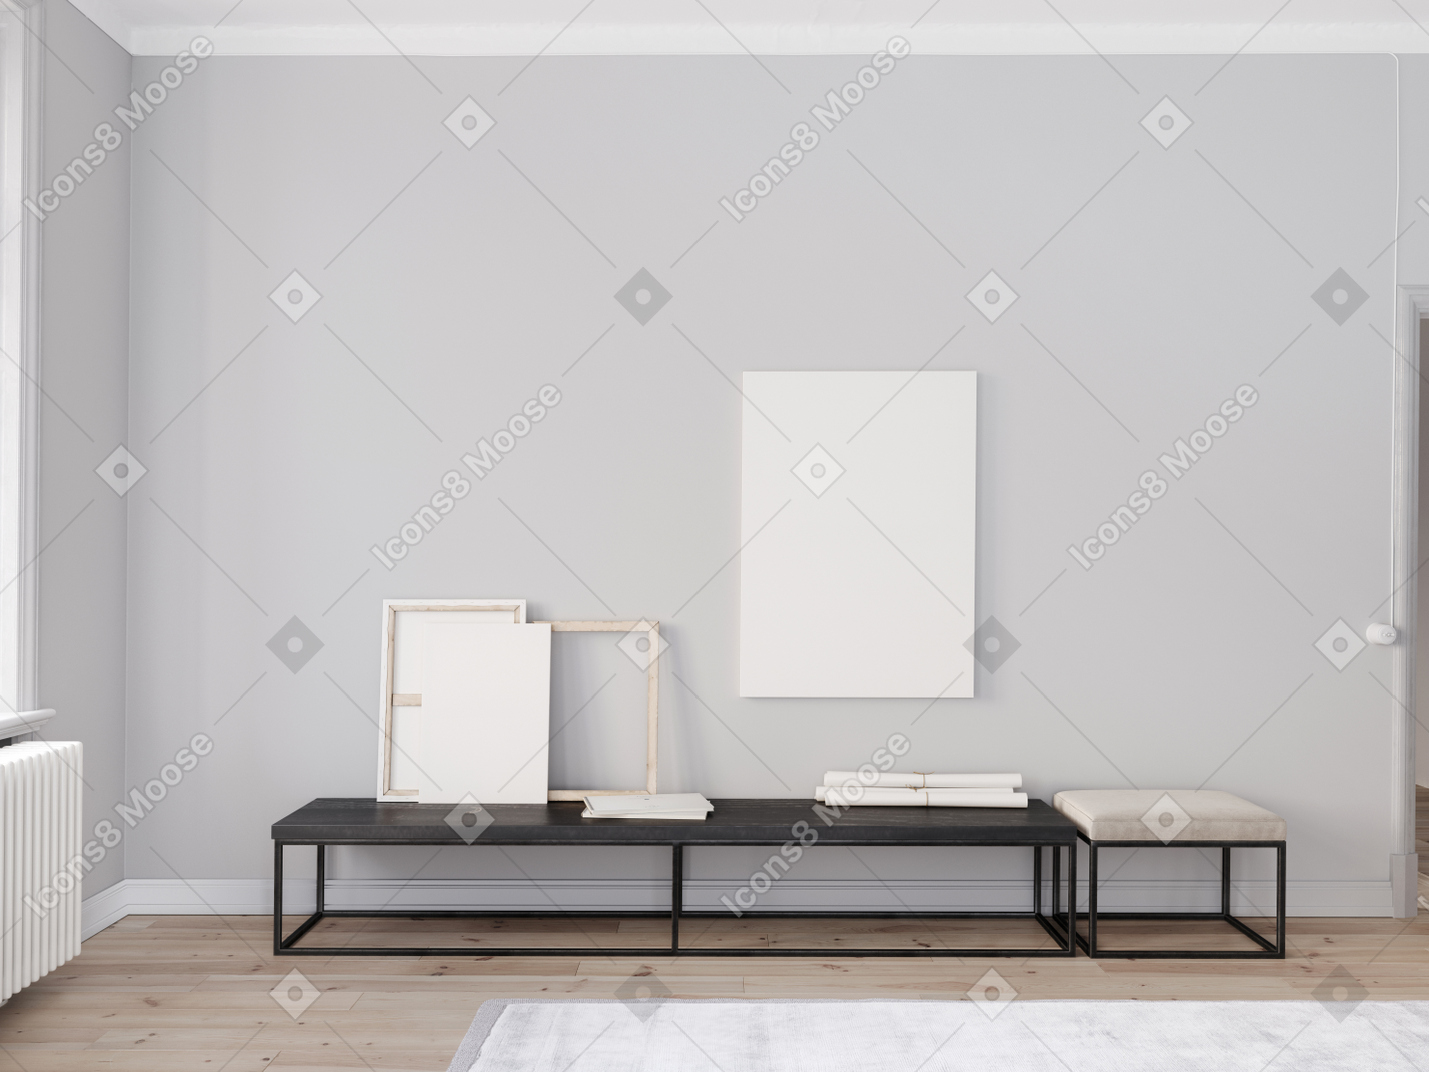 A room with blank canvases